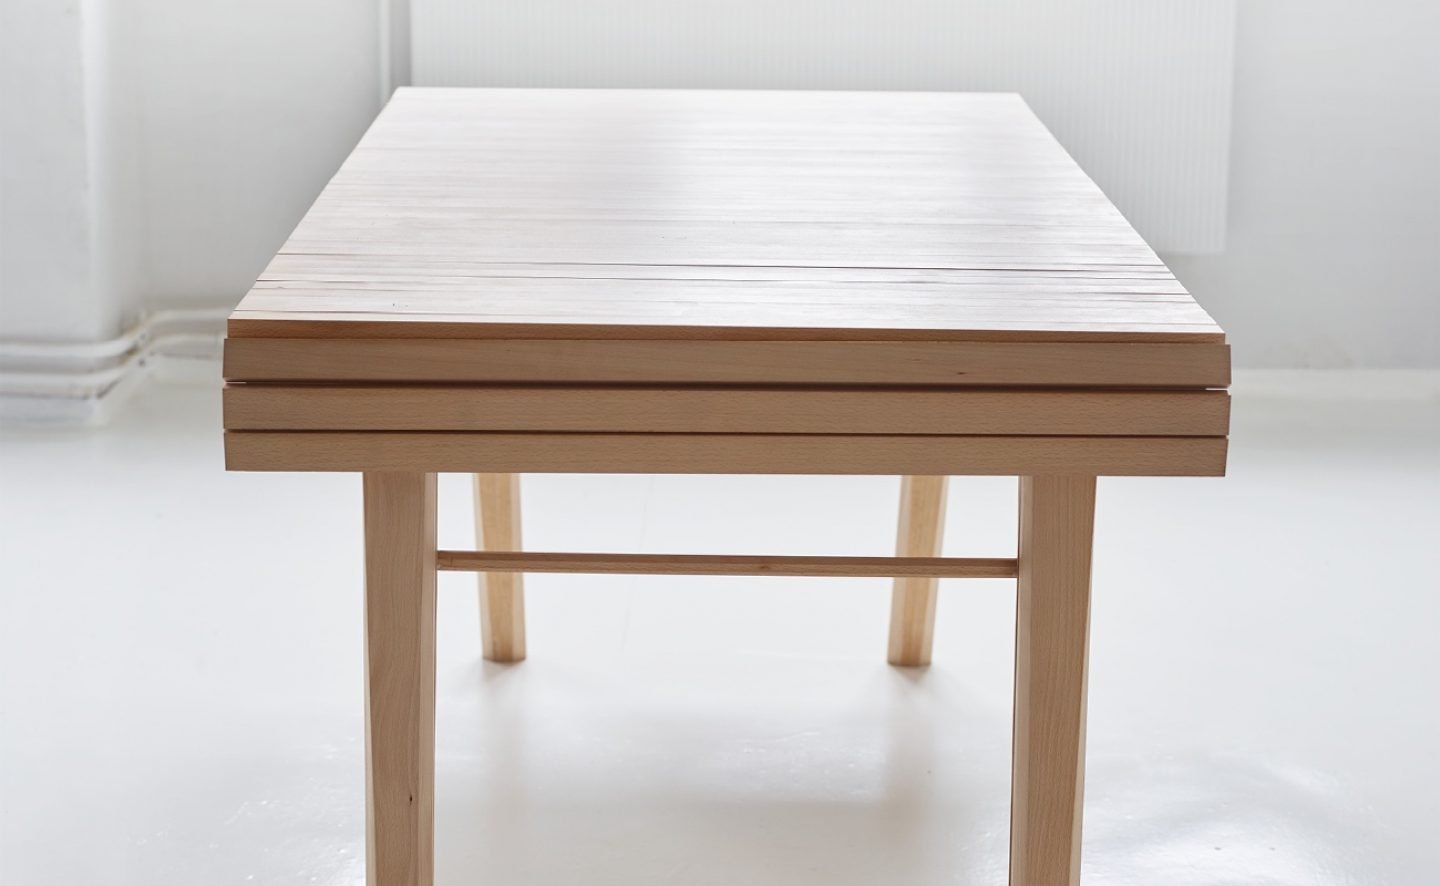 Design_Roll-out_Table_Marcus_Voraa_IGNANT_7